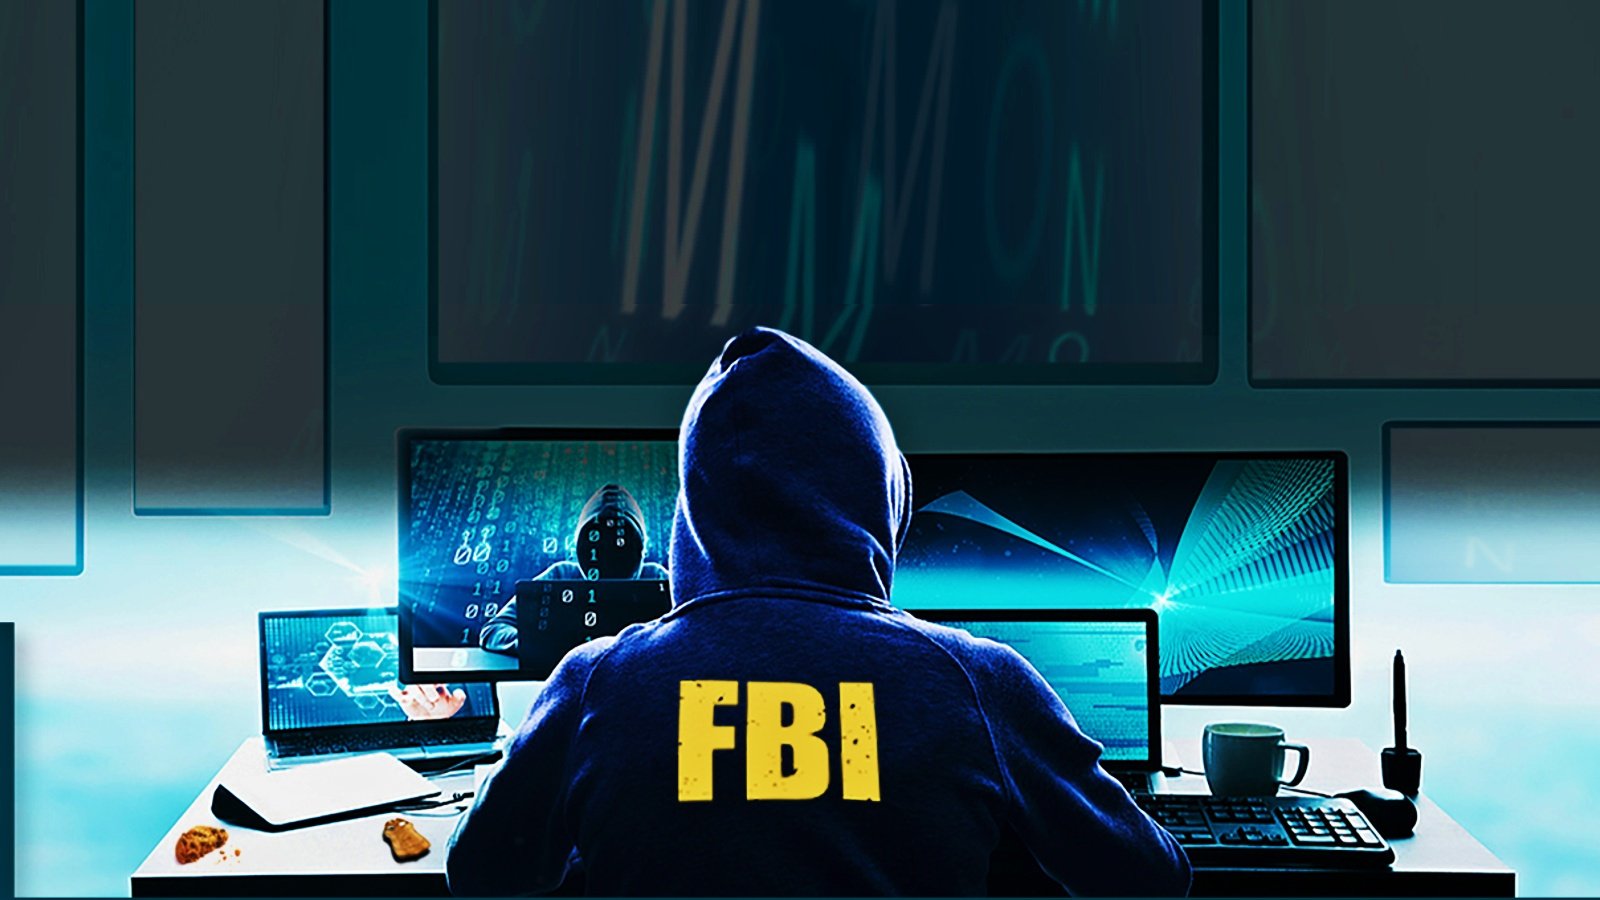 FBI: ALPHV ransomware raked in $300 million from over 1,000 victims